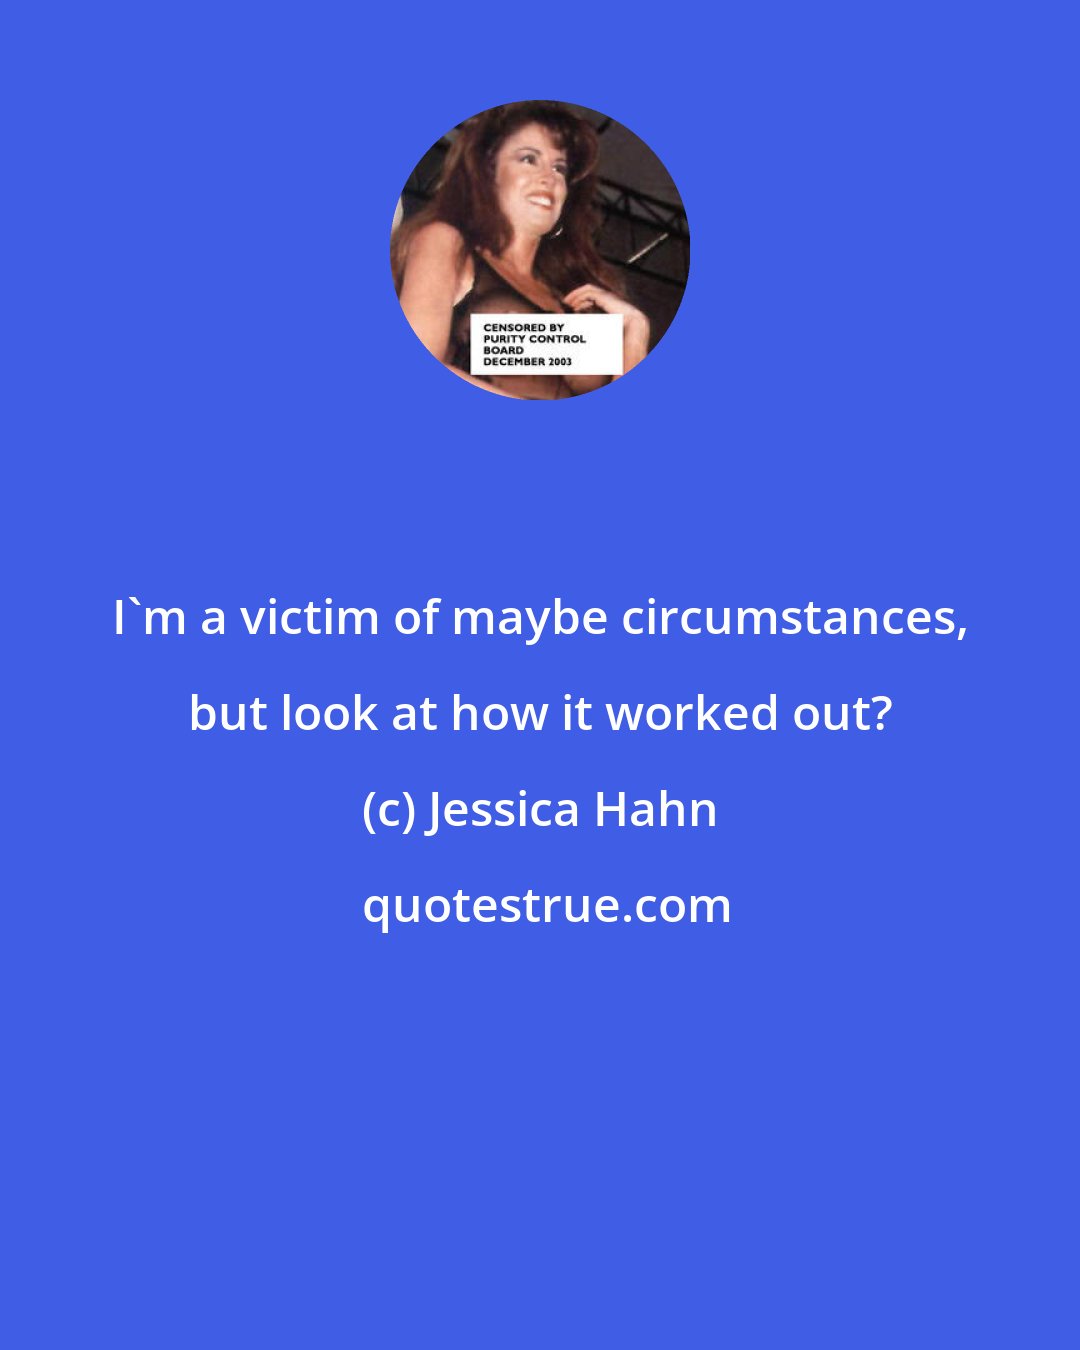 Jessica Hahn: I'm a victim of maybe circumstances, but look at how it worked out?